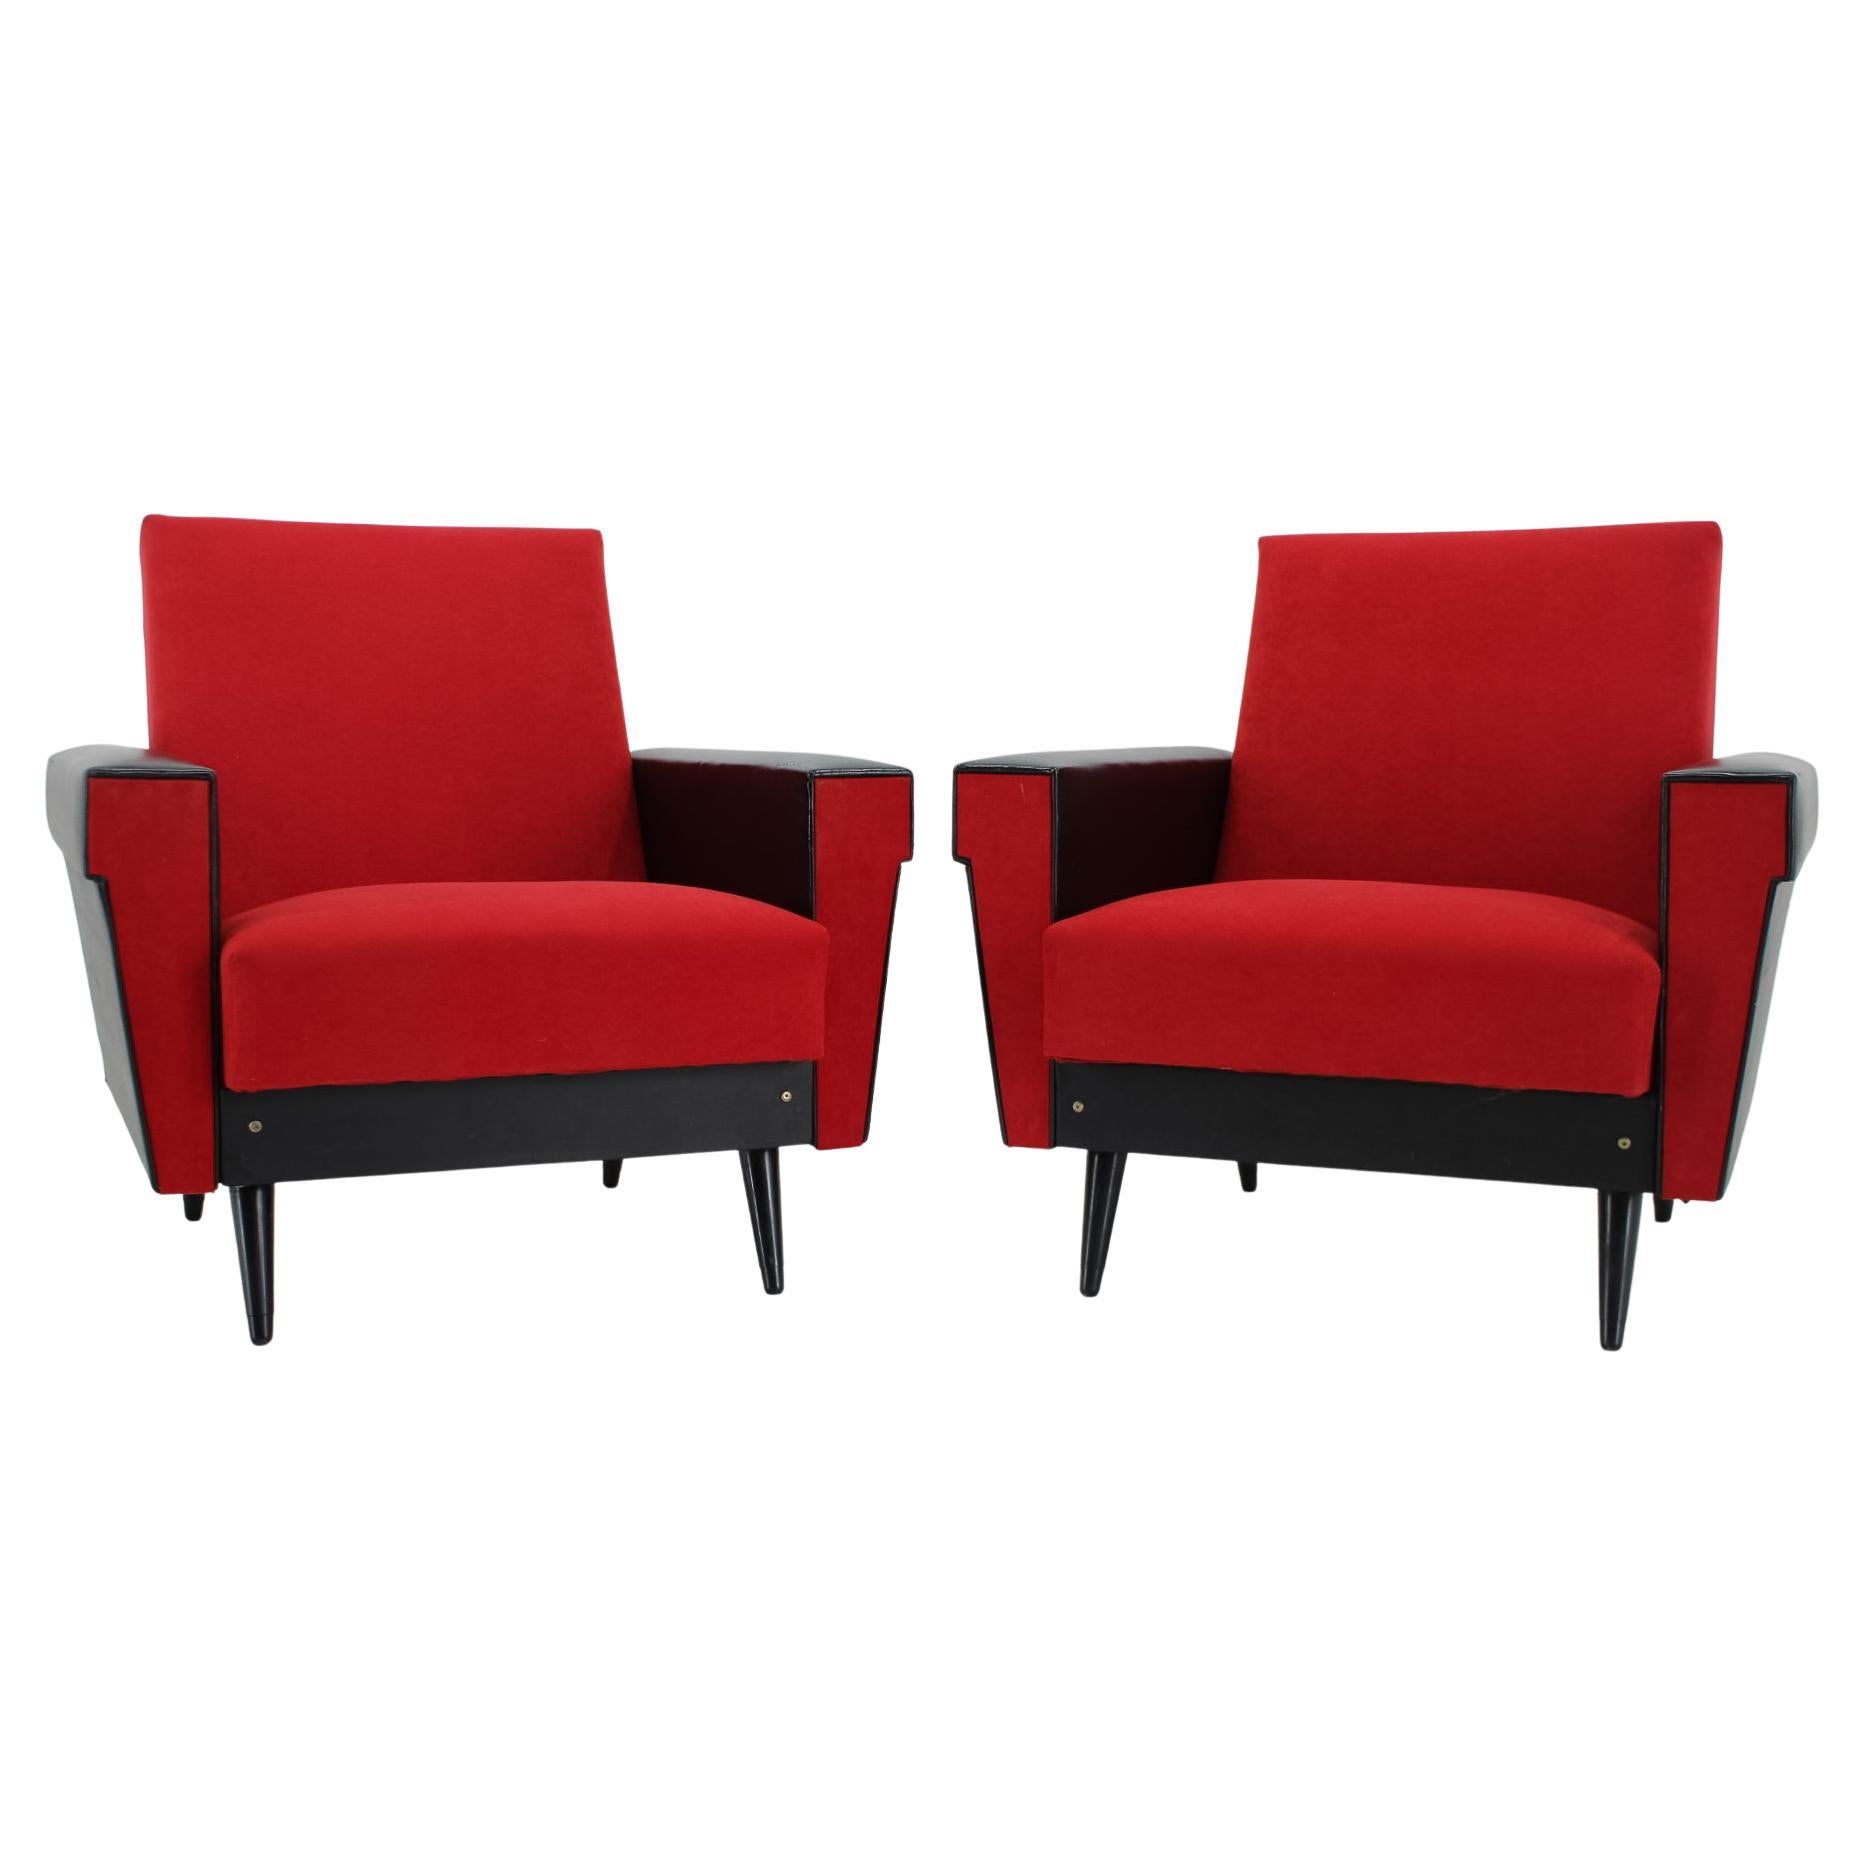 1970's Pair of Leatherette and Red Fabric Armchairs, Czechoslovakia